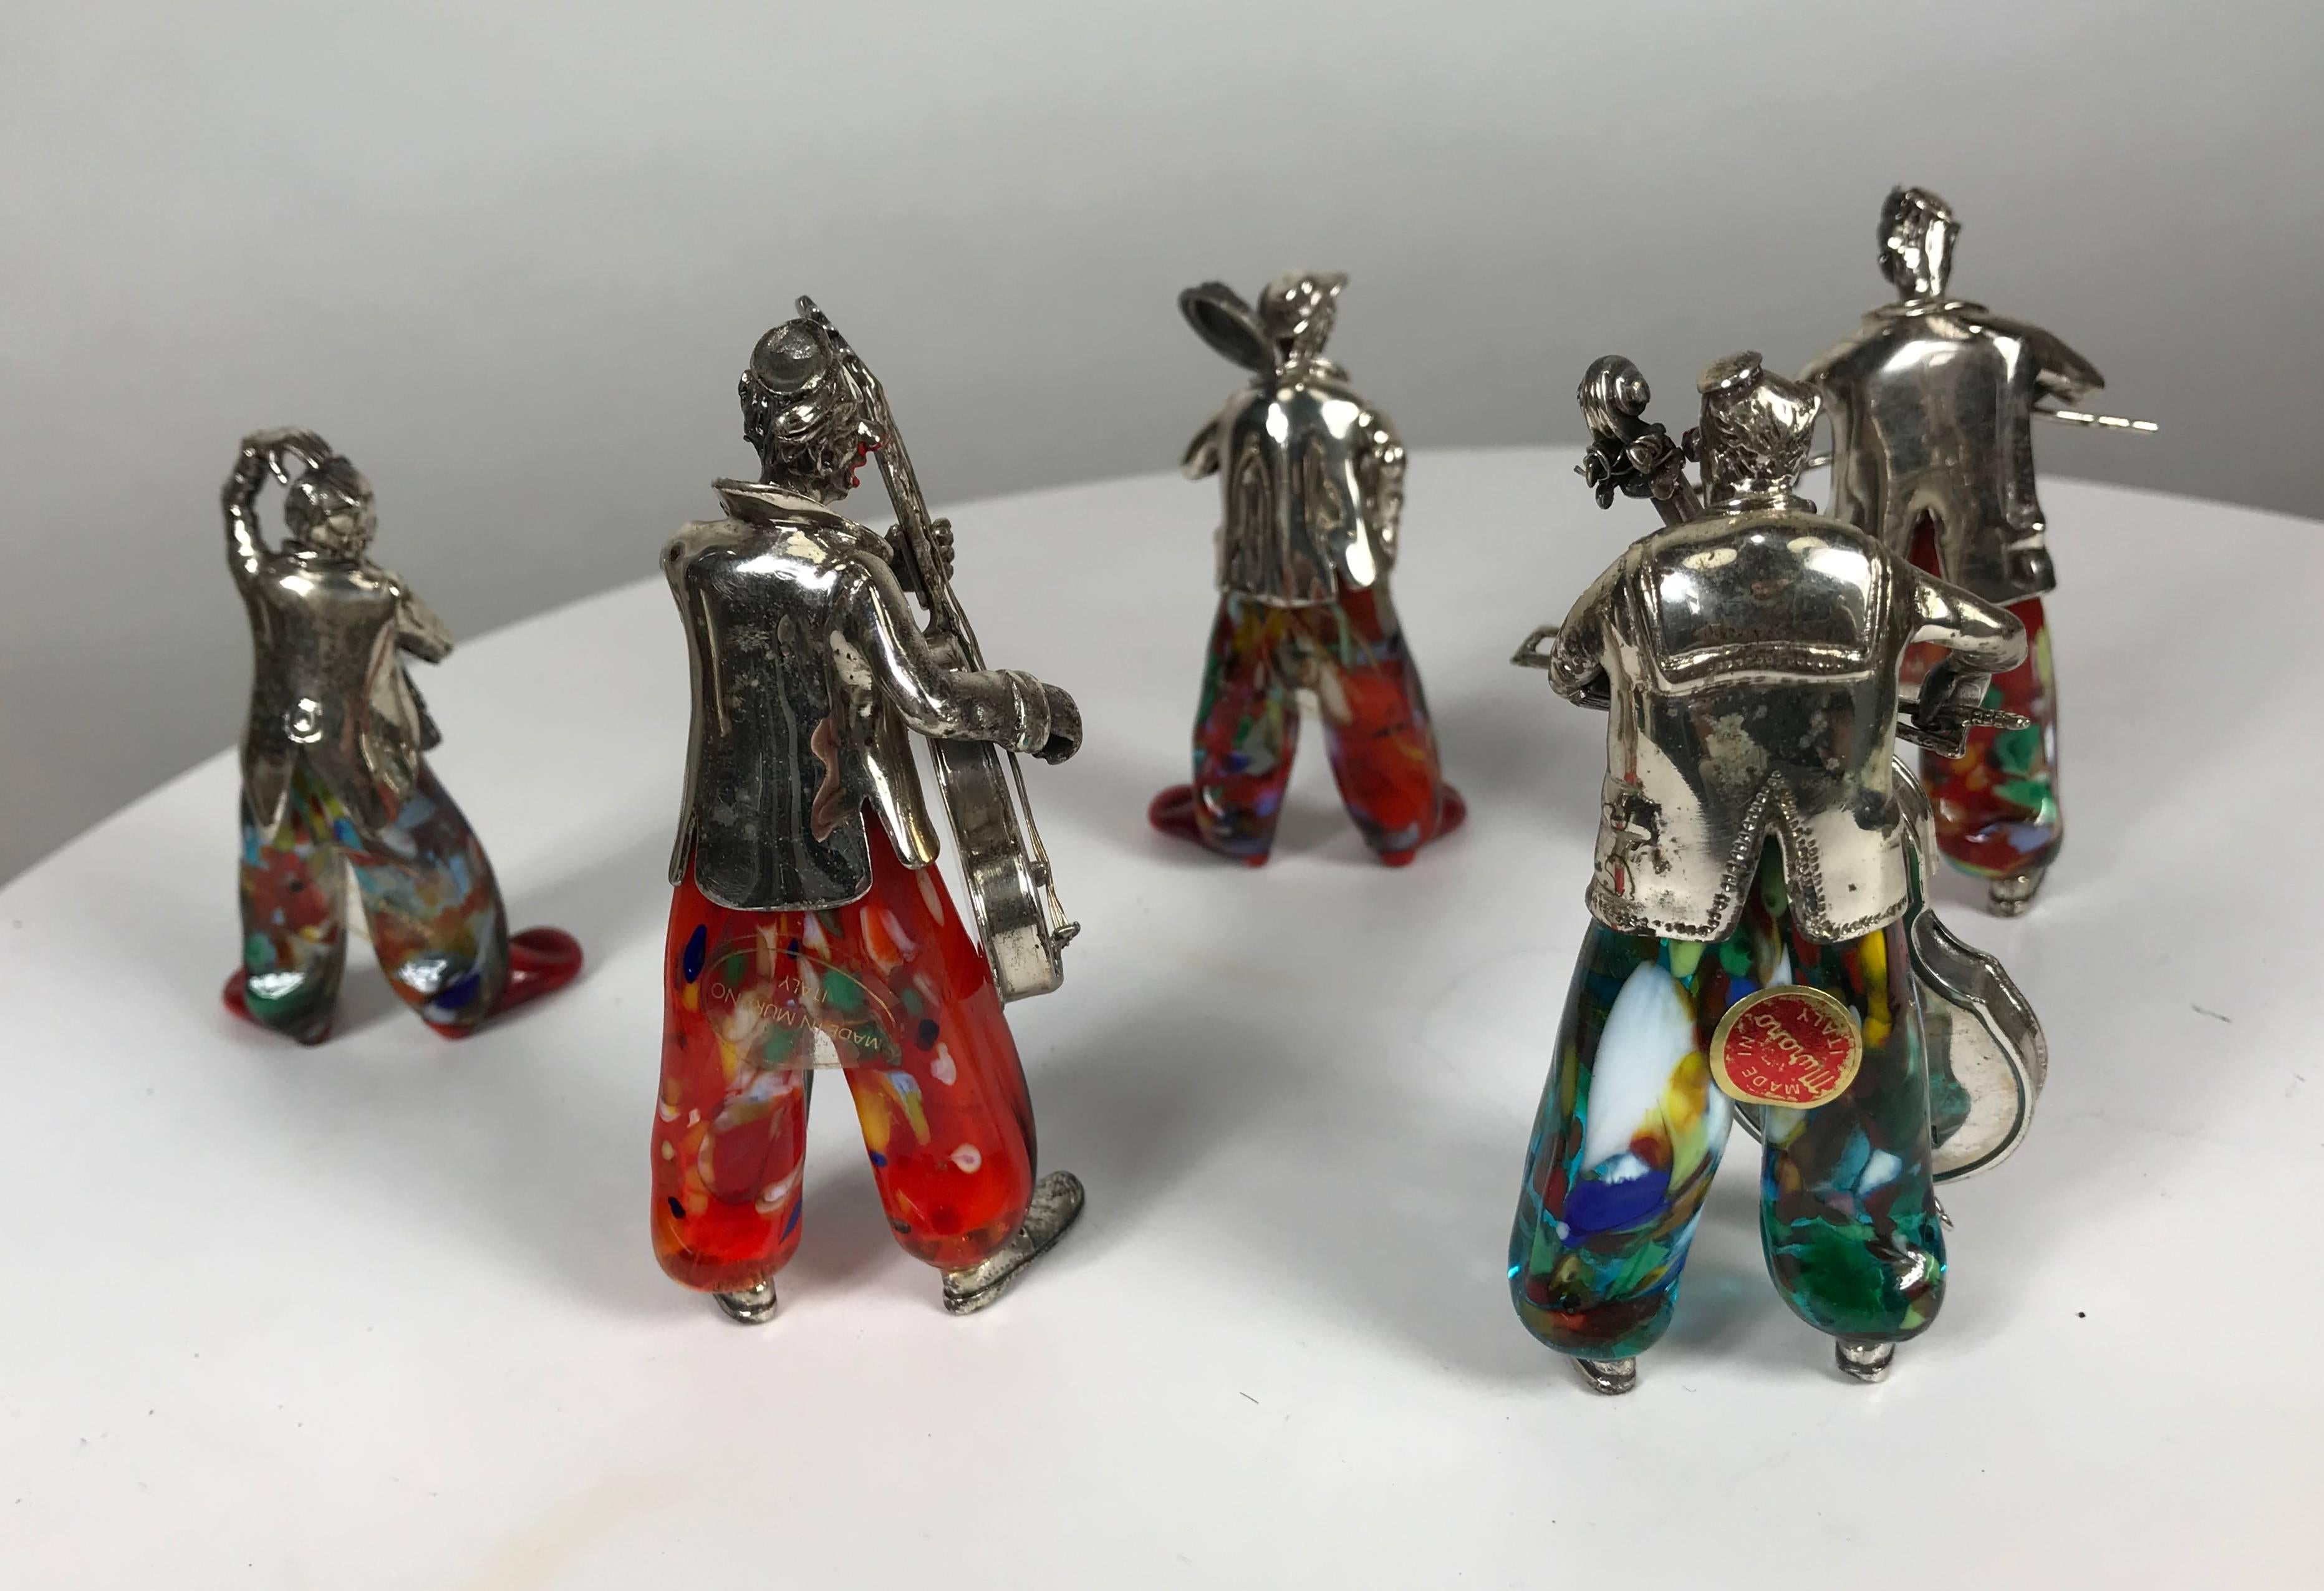 Set of five Murano glass and sterling silver musical clowns by Vittorio Angini,, charming set with stunning detail, retain original silver plaque signatures and made in Murano Italy labels.